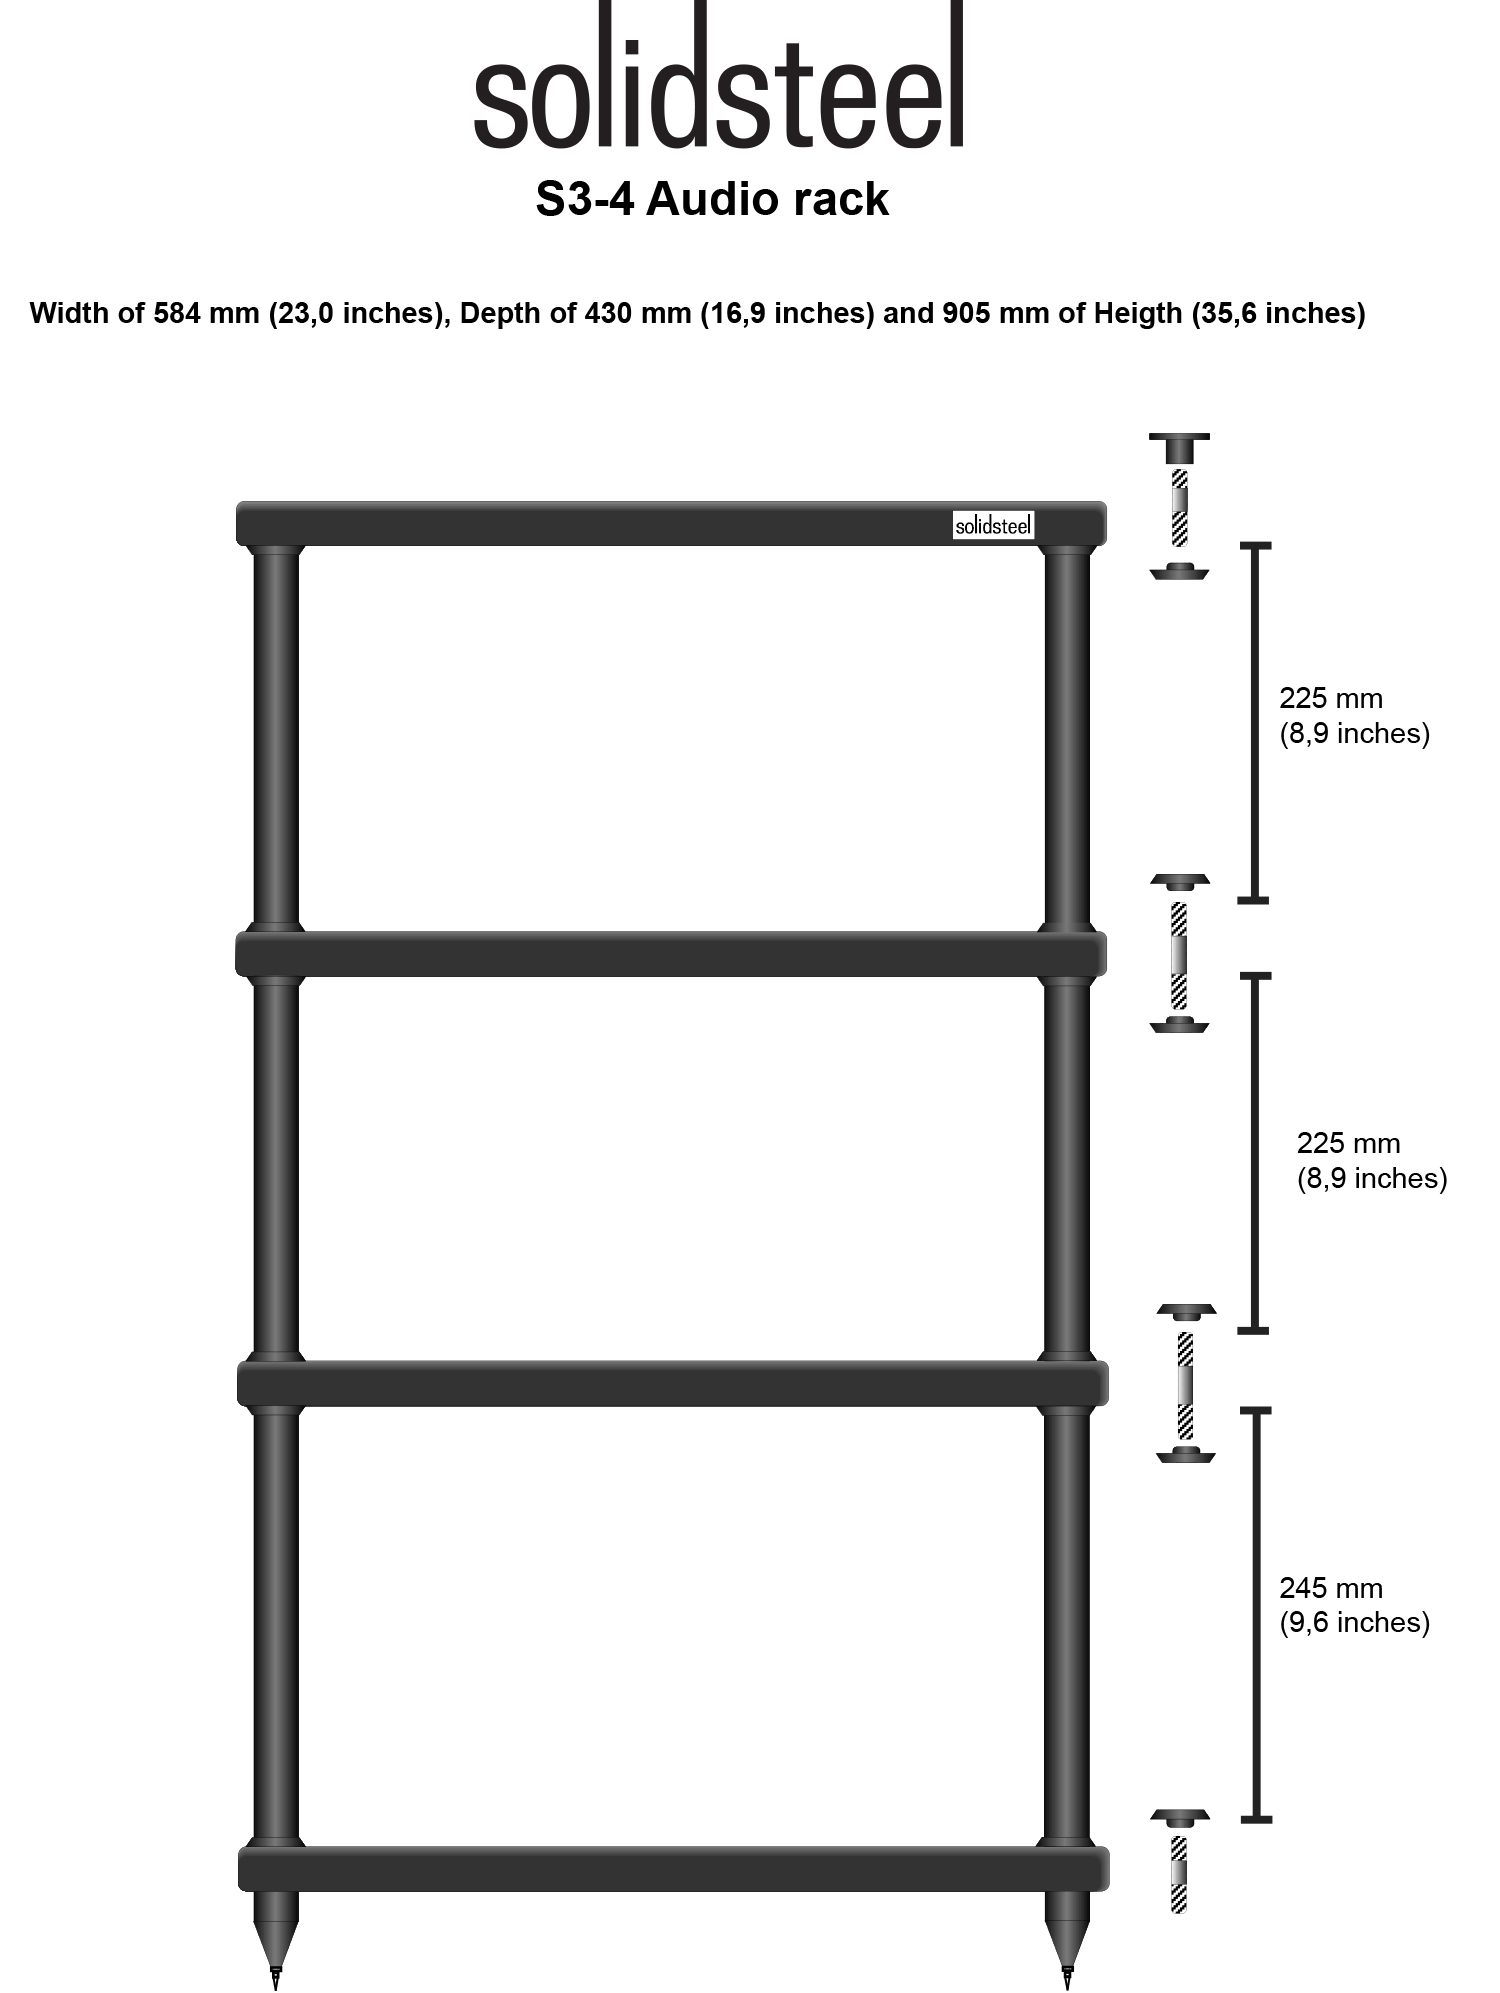  Solidsteel S3-4 taille dimensions rack